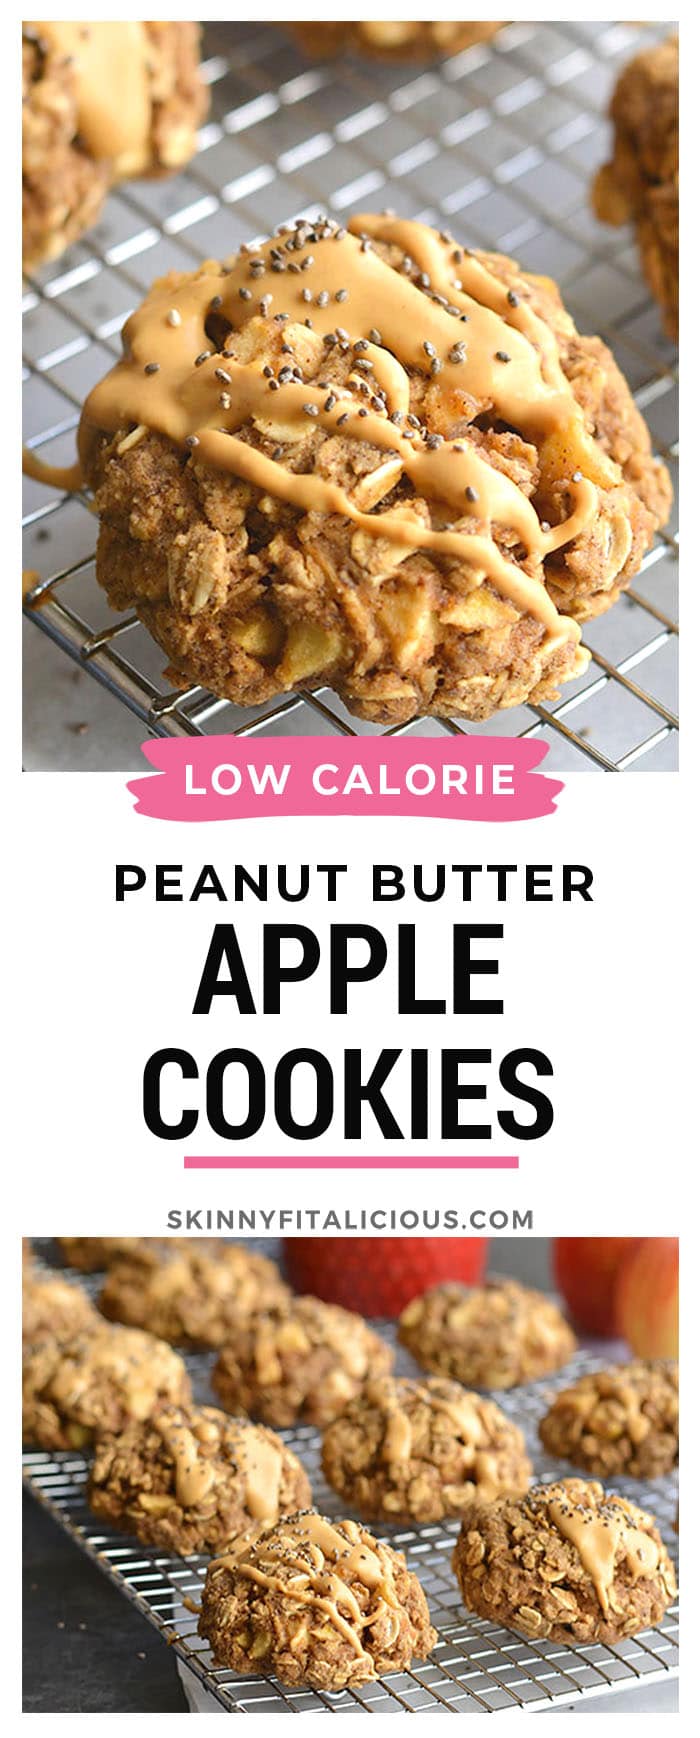 Apple Peanut Butter Cookies made with flax, chia and oats. A low calorie, gluten-free and vegan friendly snack that's easy to make and a nutritious treat! Gluten Free + Vegan + Low Calorie